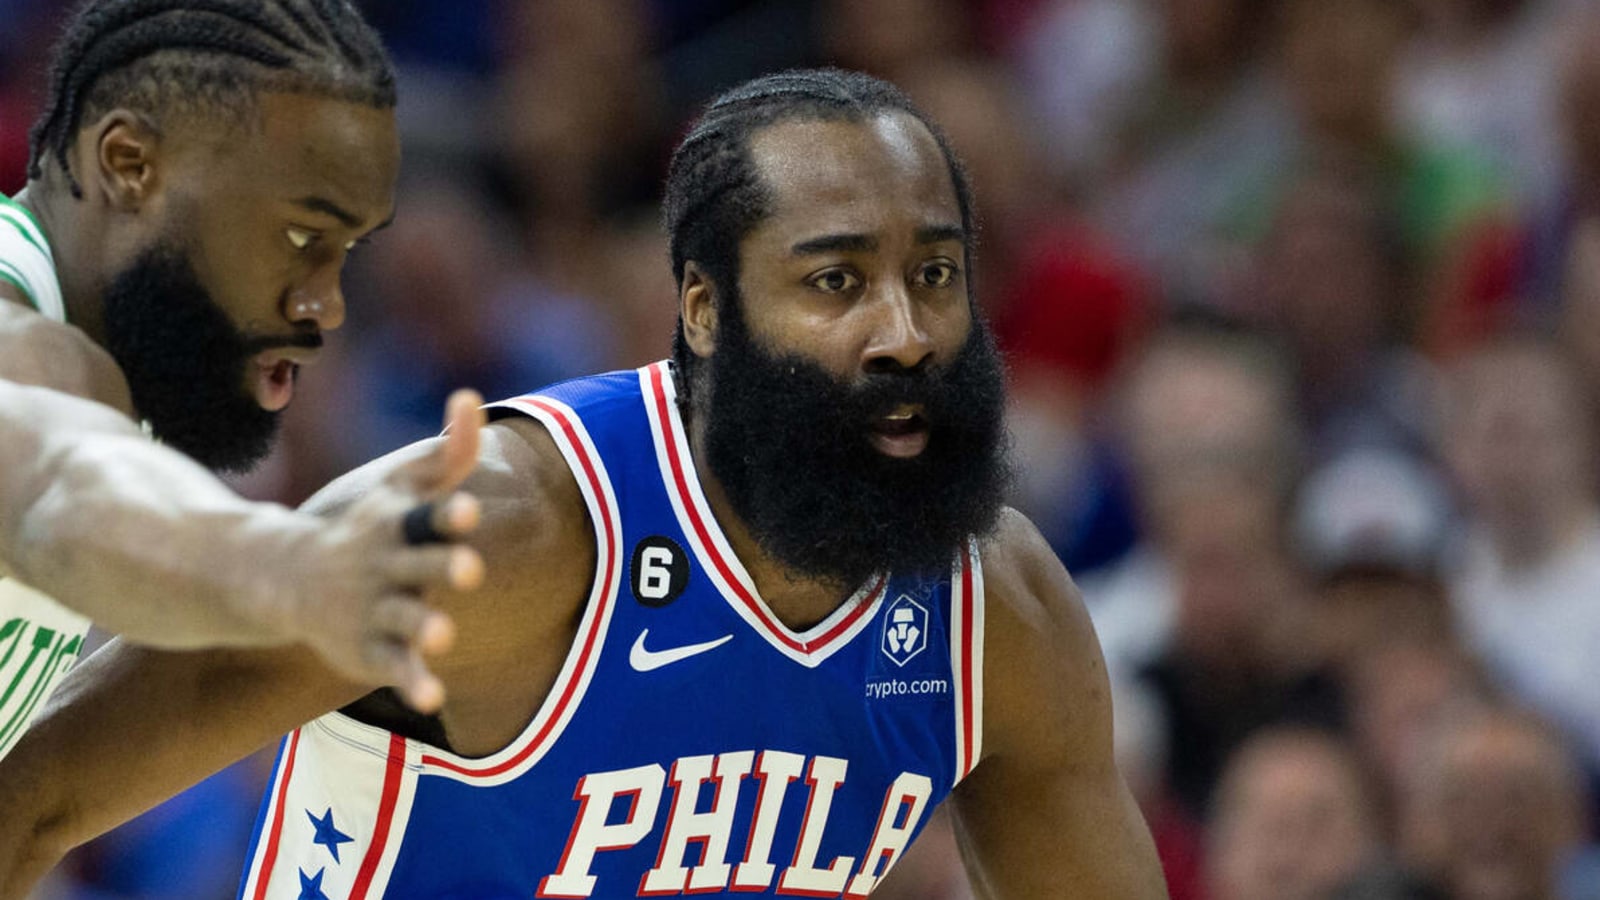 Report: James Harden could face disciplinary action